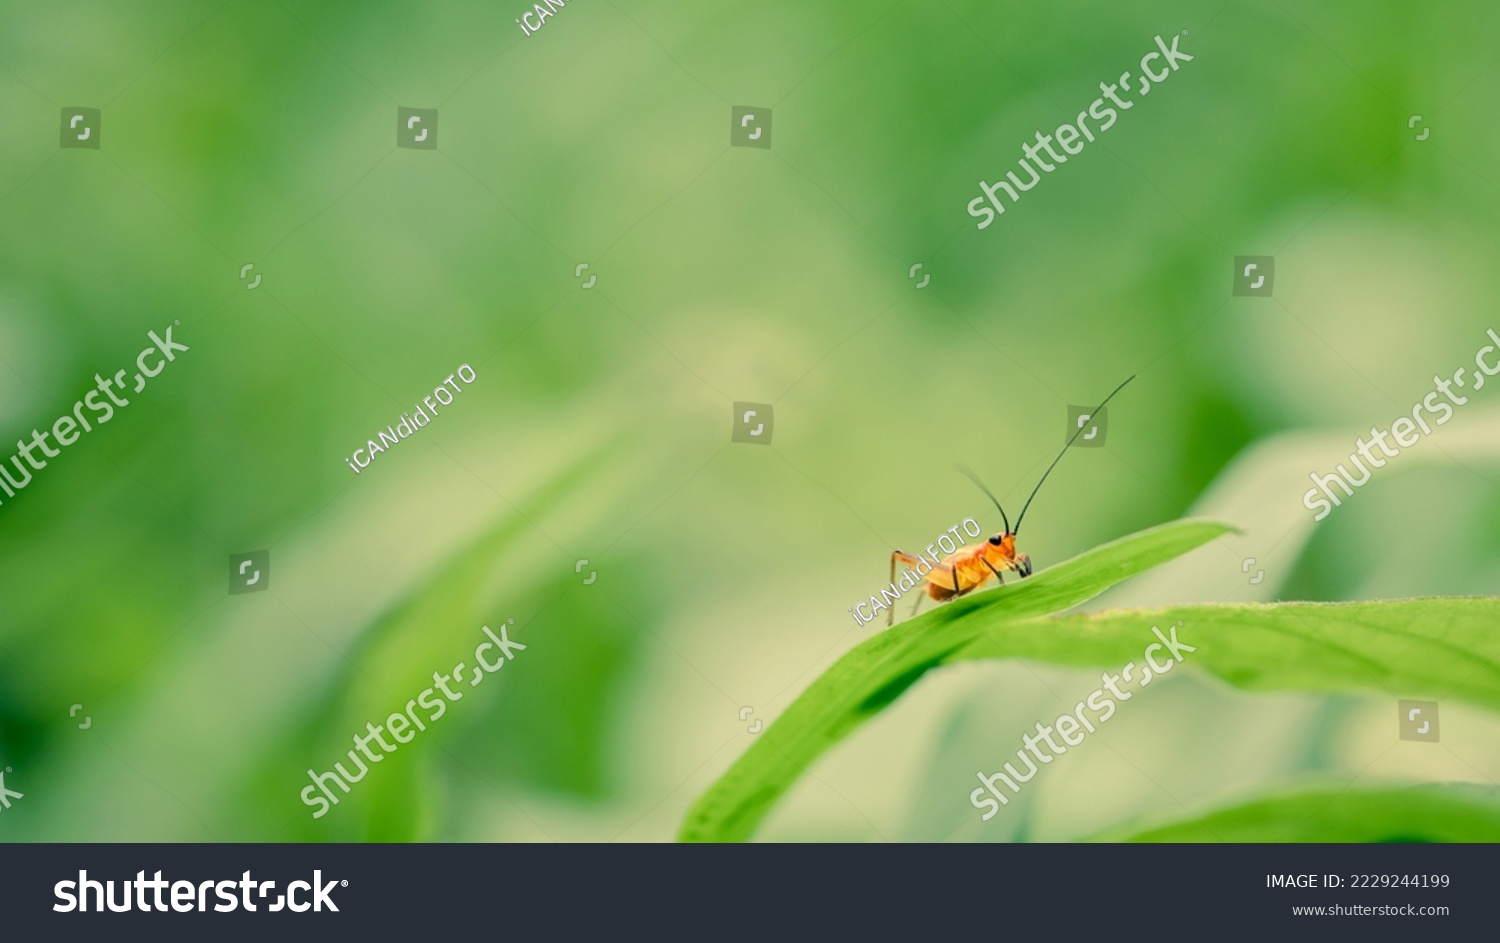 Close-up of small cricket on green grass in morning, Wonderful young little grasshopper, Nature blurred background, Colorful insect photo. #2229244199